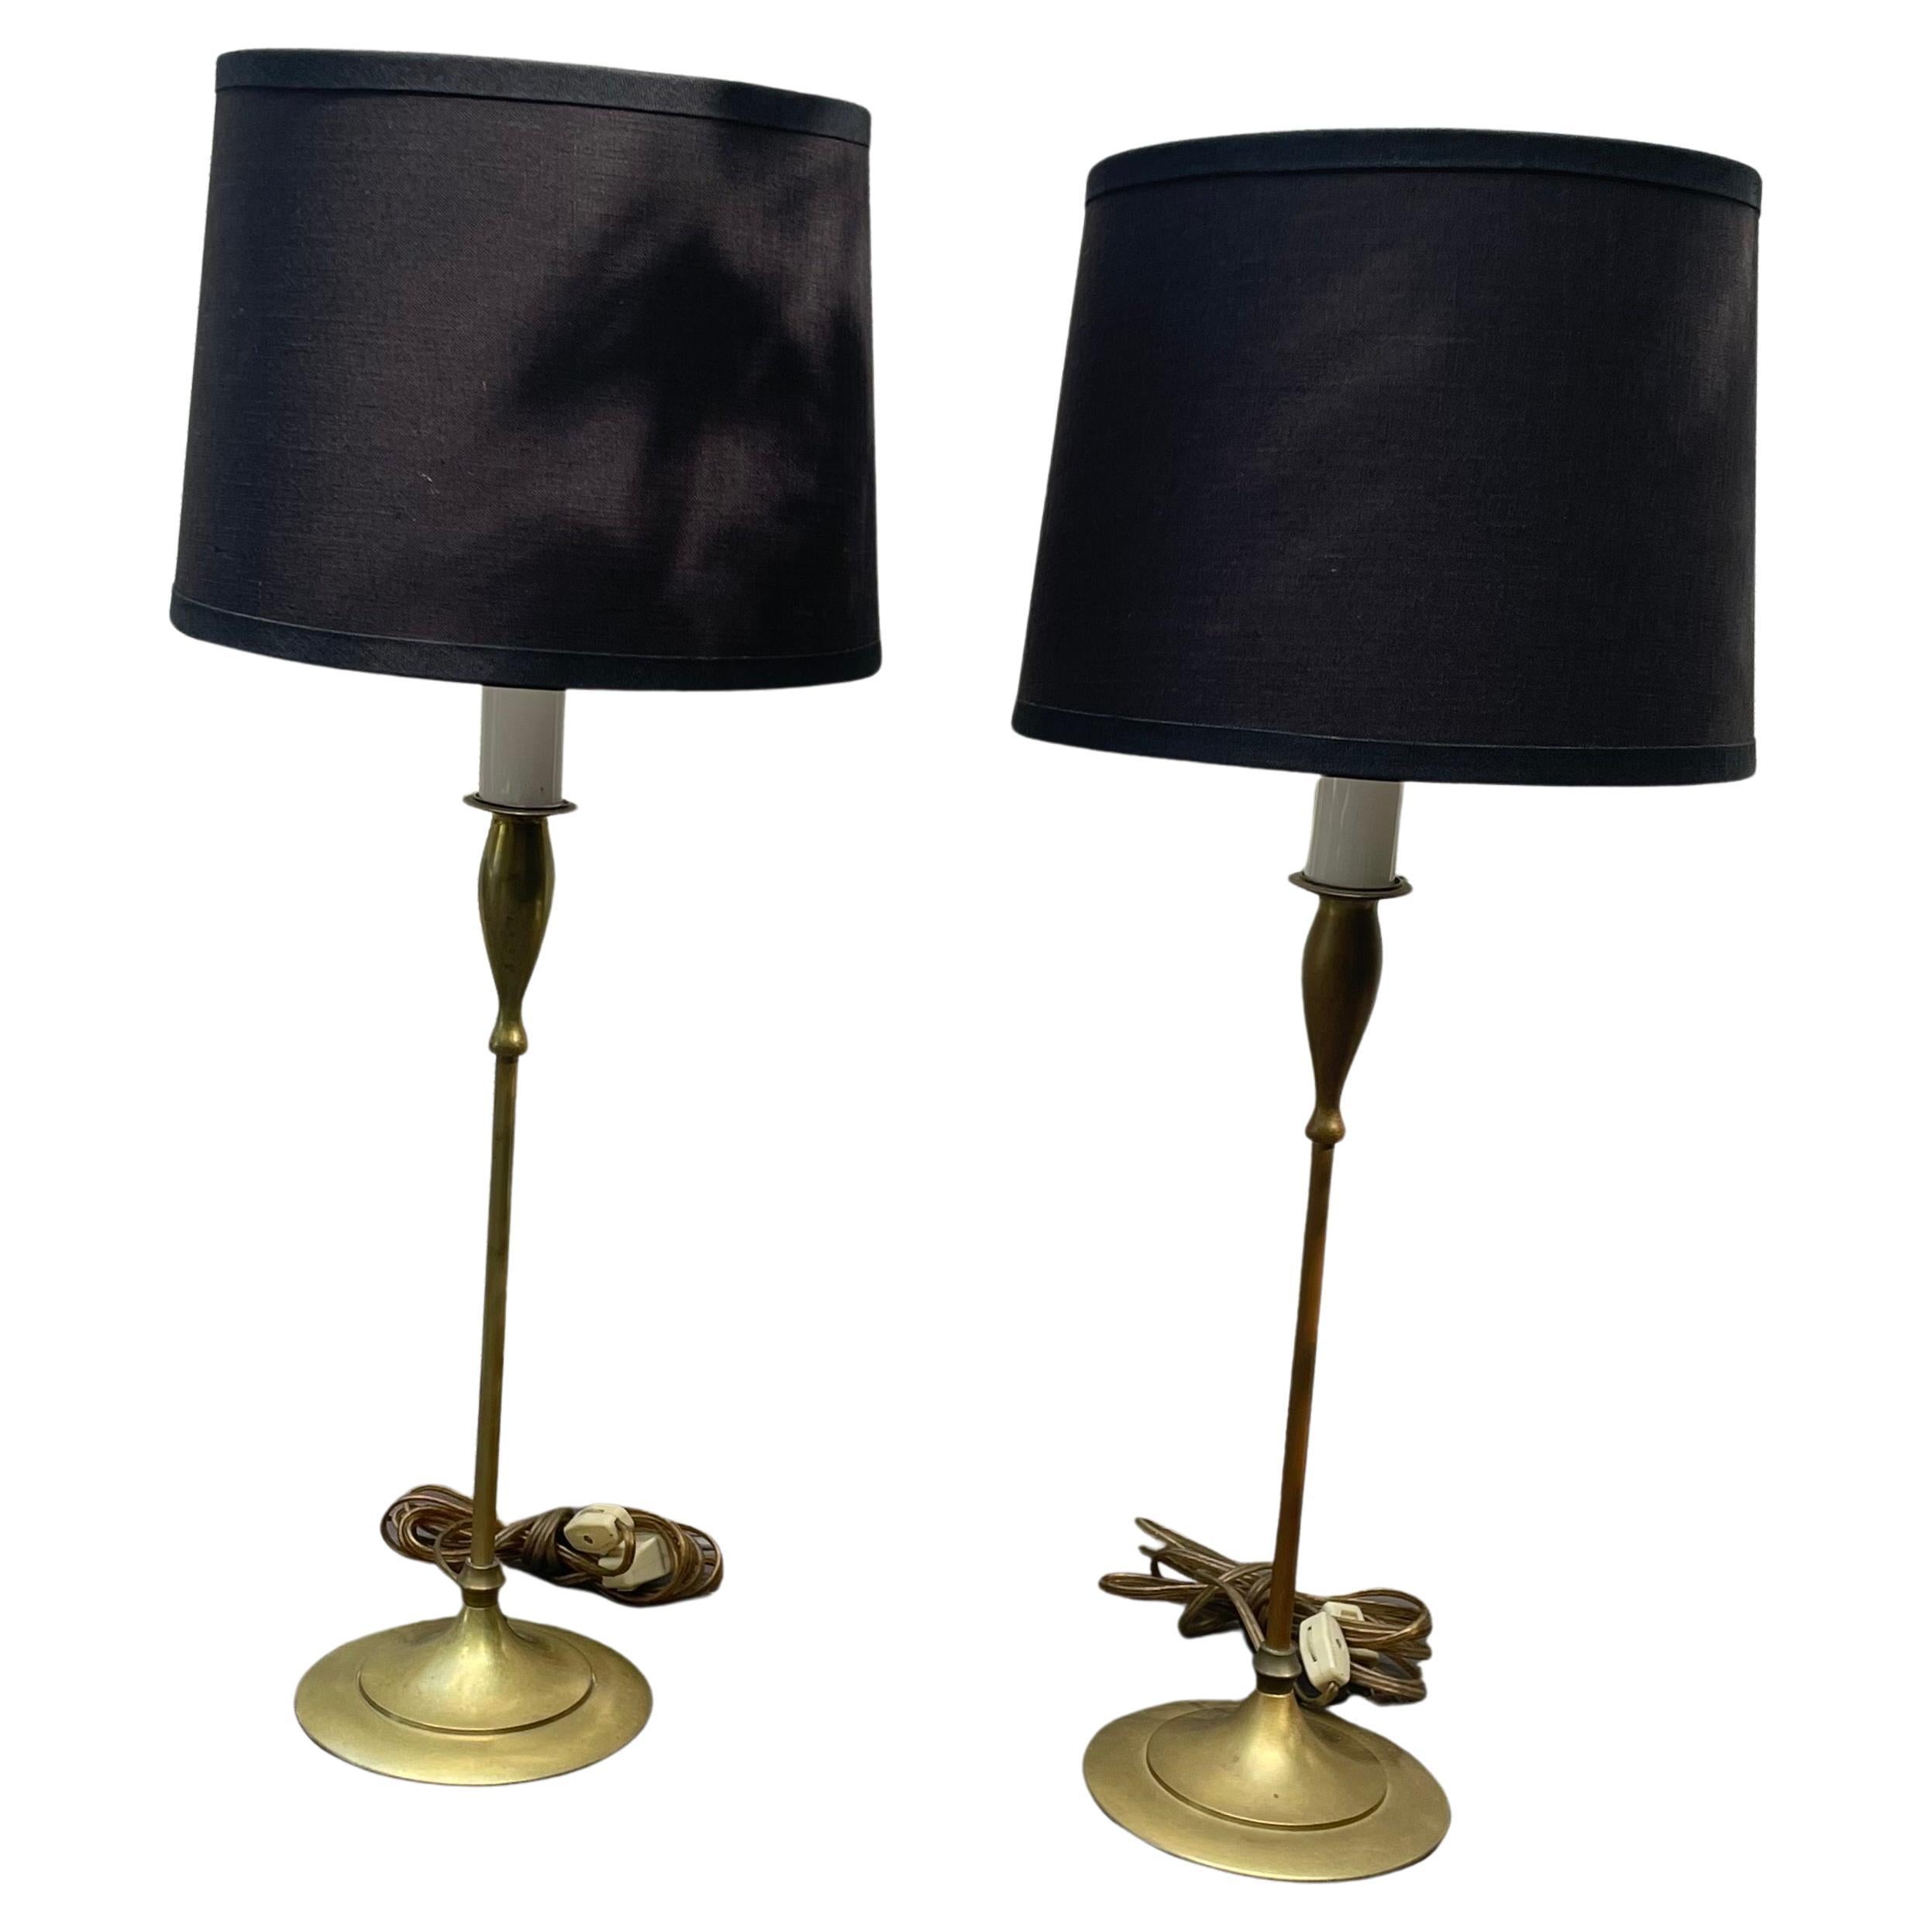 Pair of Hollywood Regency Brass Tulip Base Table Lamps by Charles Parker